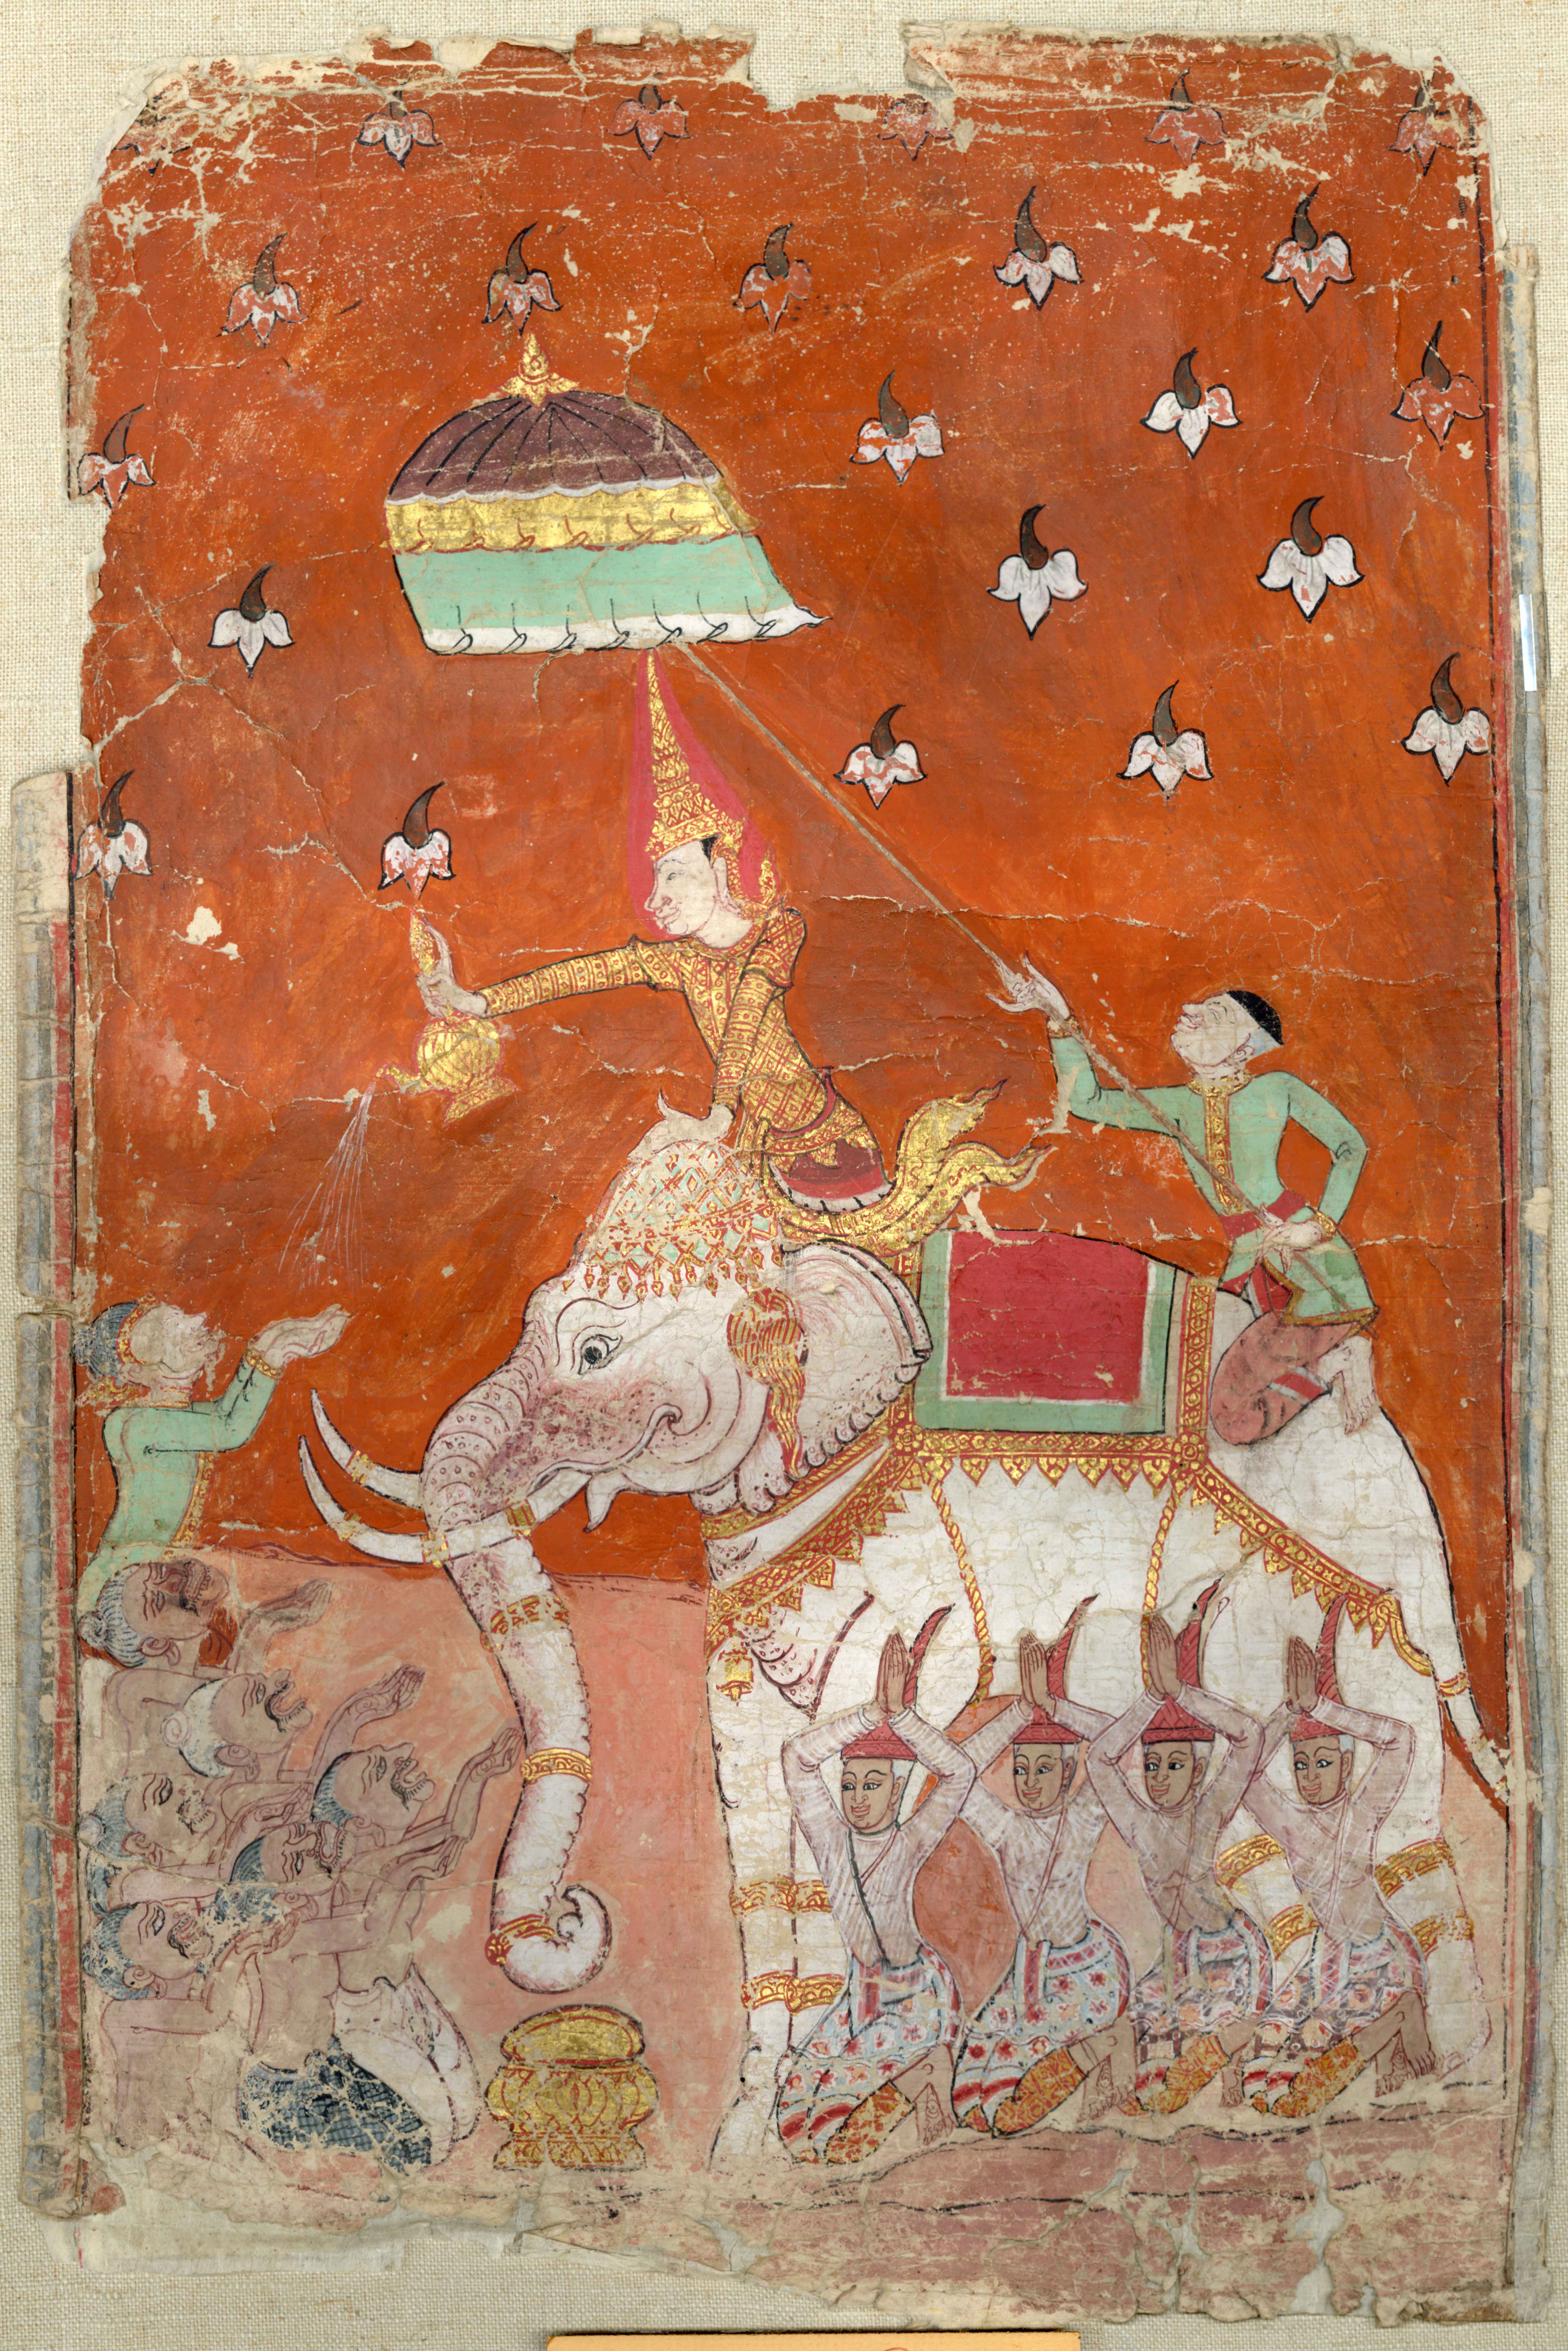 Figure in gold attire sits on an elephant. A figure sitting on the back of the elephant holds a cover over the main figure. Several other figures sit around the legs of the elephant, some looking up at the figure in gold with hands in a begging position. 